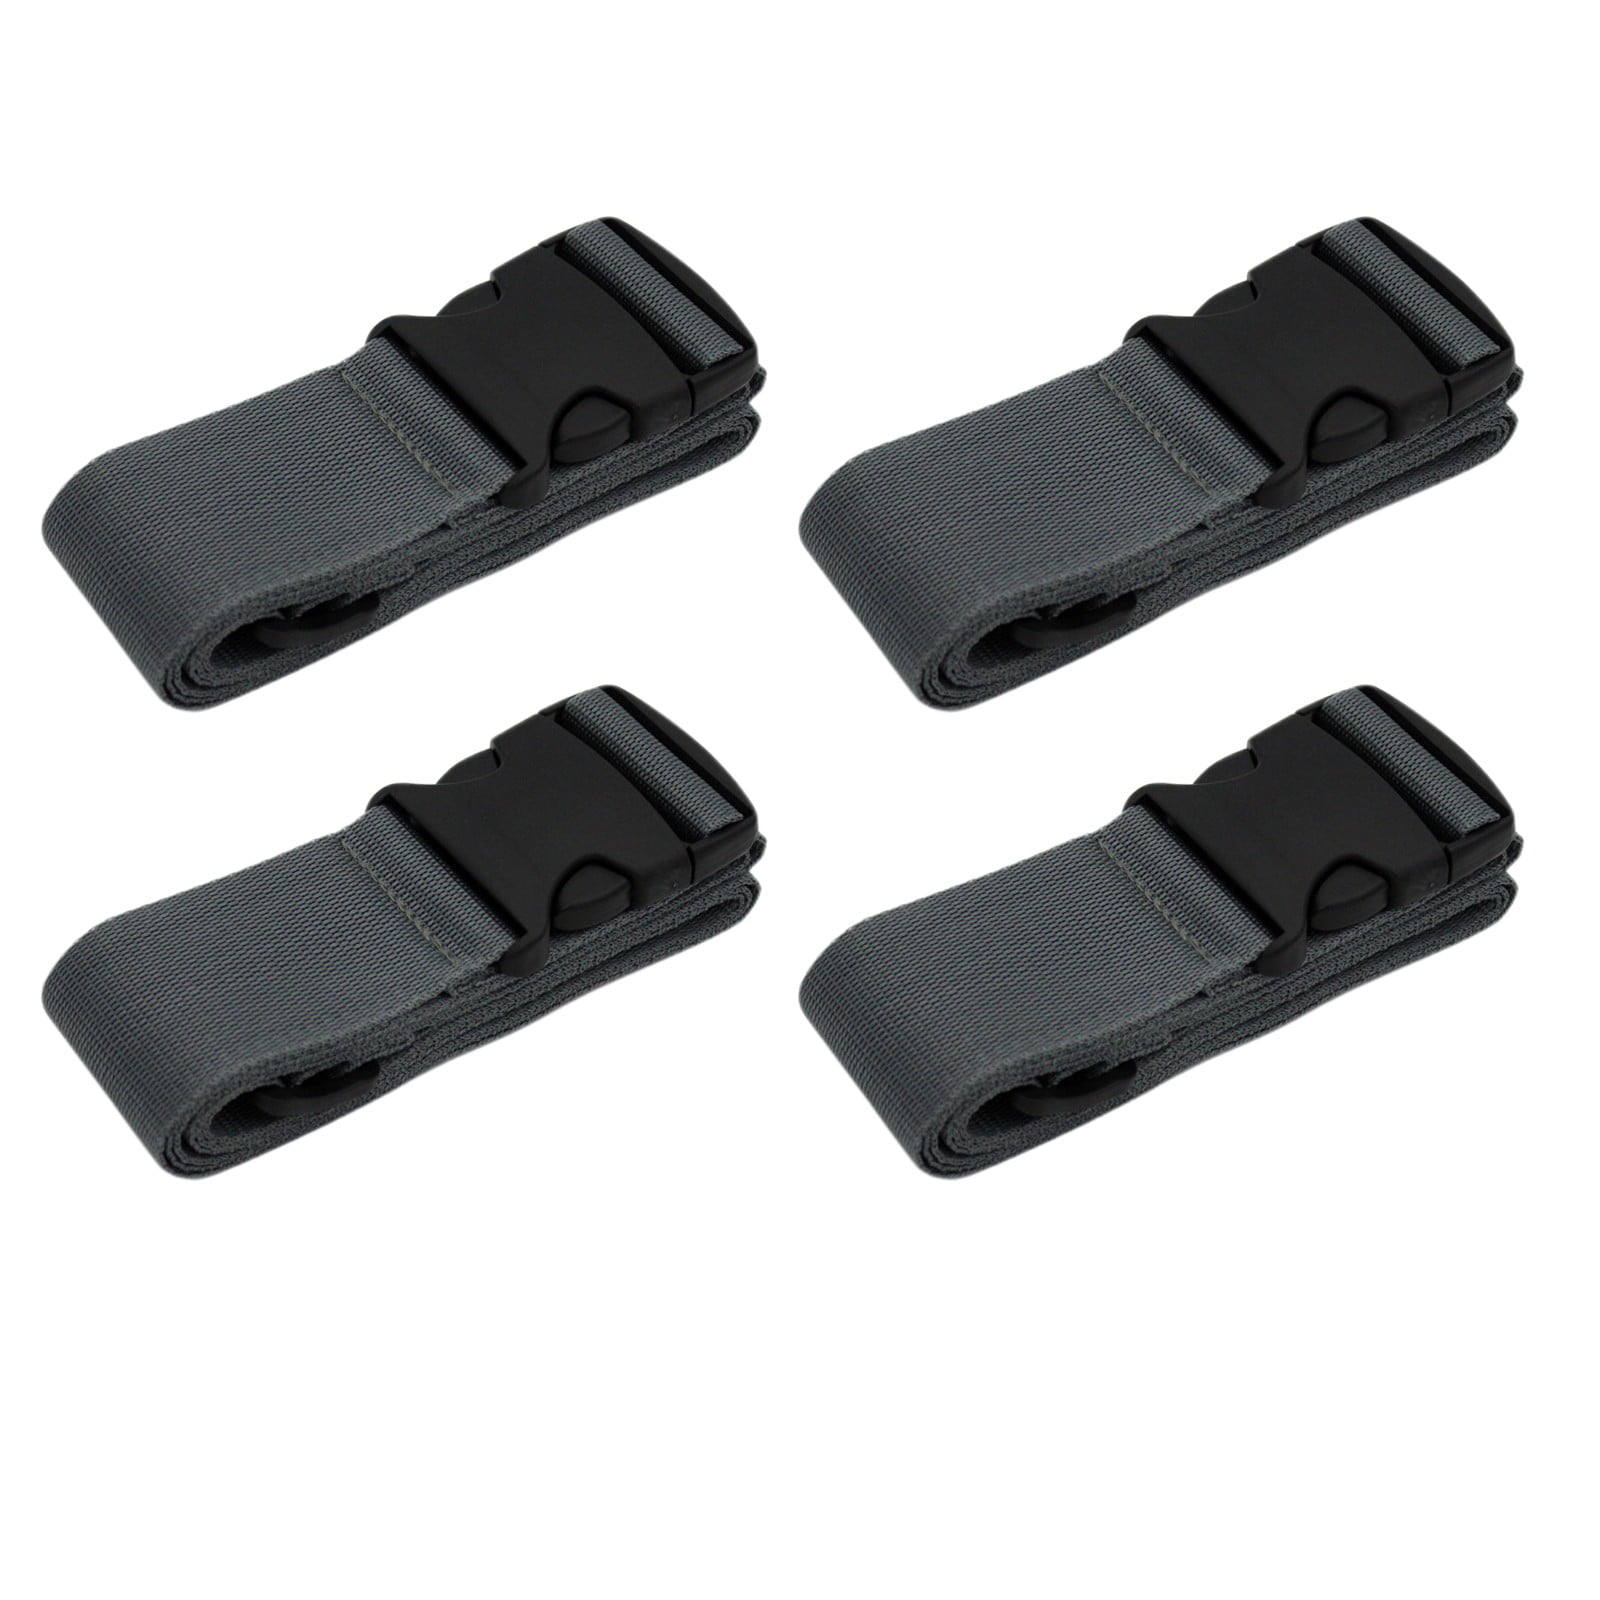 Connect your 3 luggages 4pcs Two Add a Bag Luggage Set Strap Travel Luggage Suitcase Adjustable belt Travel Accessories Travel Attachment 